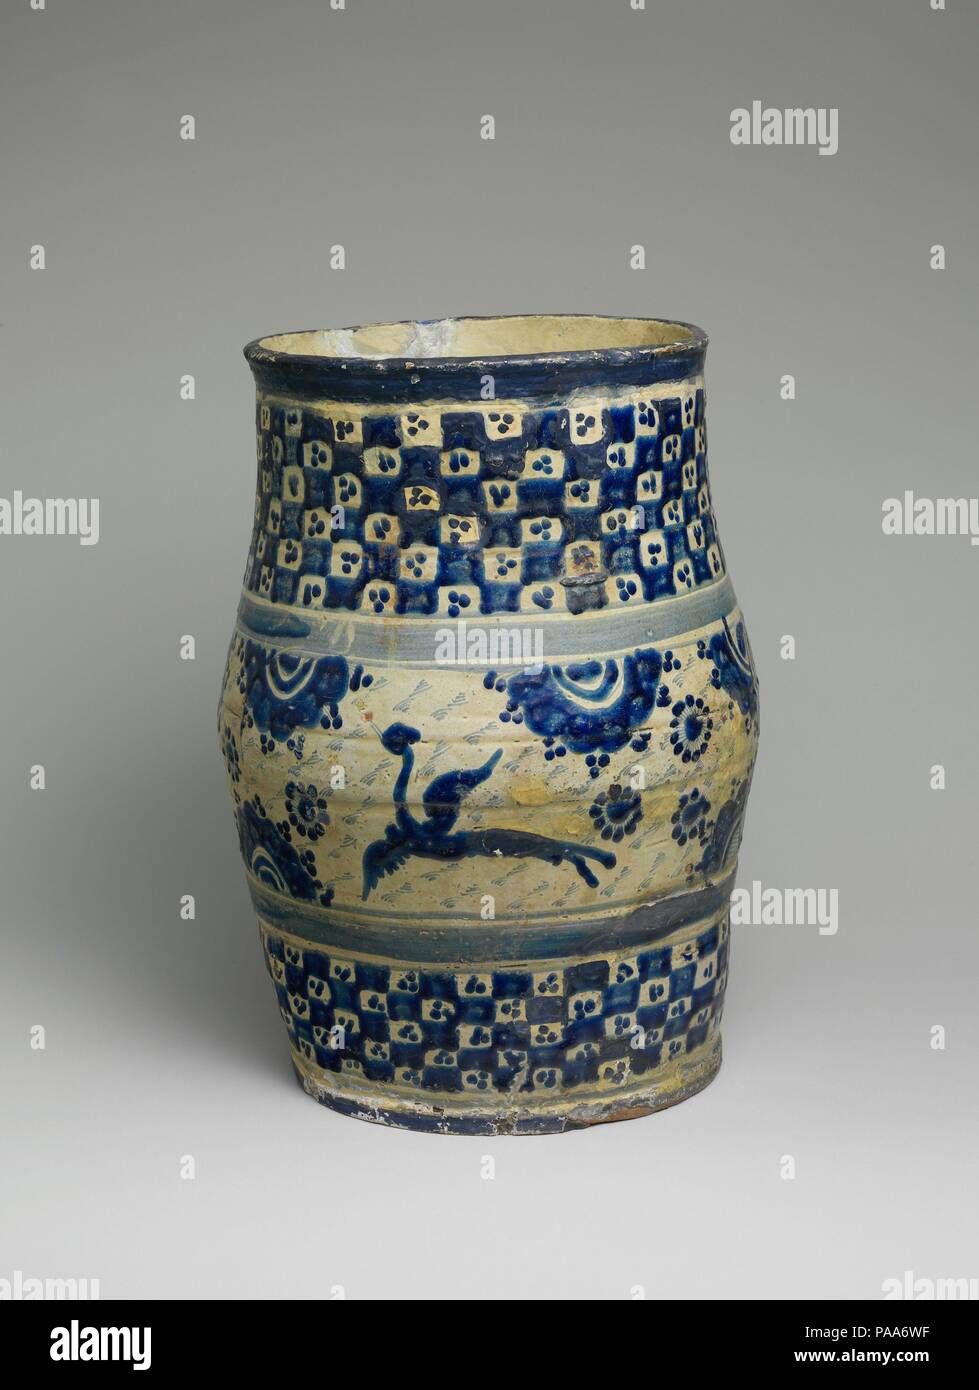 Flower Pot. Culture: Mexican. Dimensions: H. 15 in. (38.1 cm). Date: ca. 1750-1800. Museum: Metropolitan Museum of Art, New York, USA. Stock Photo